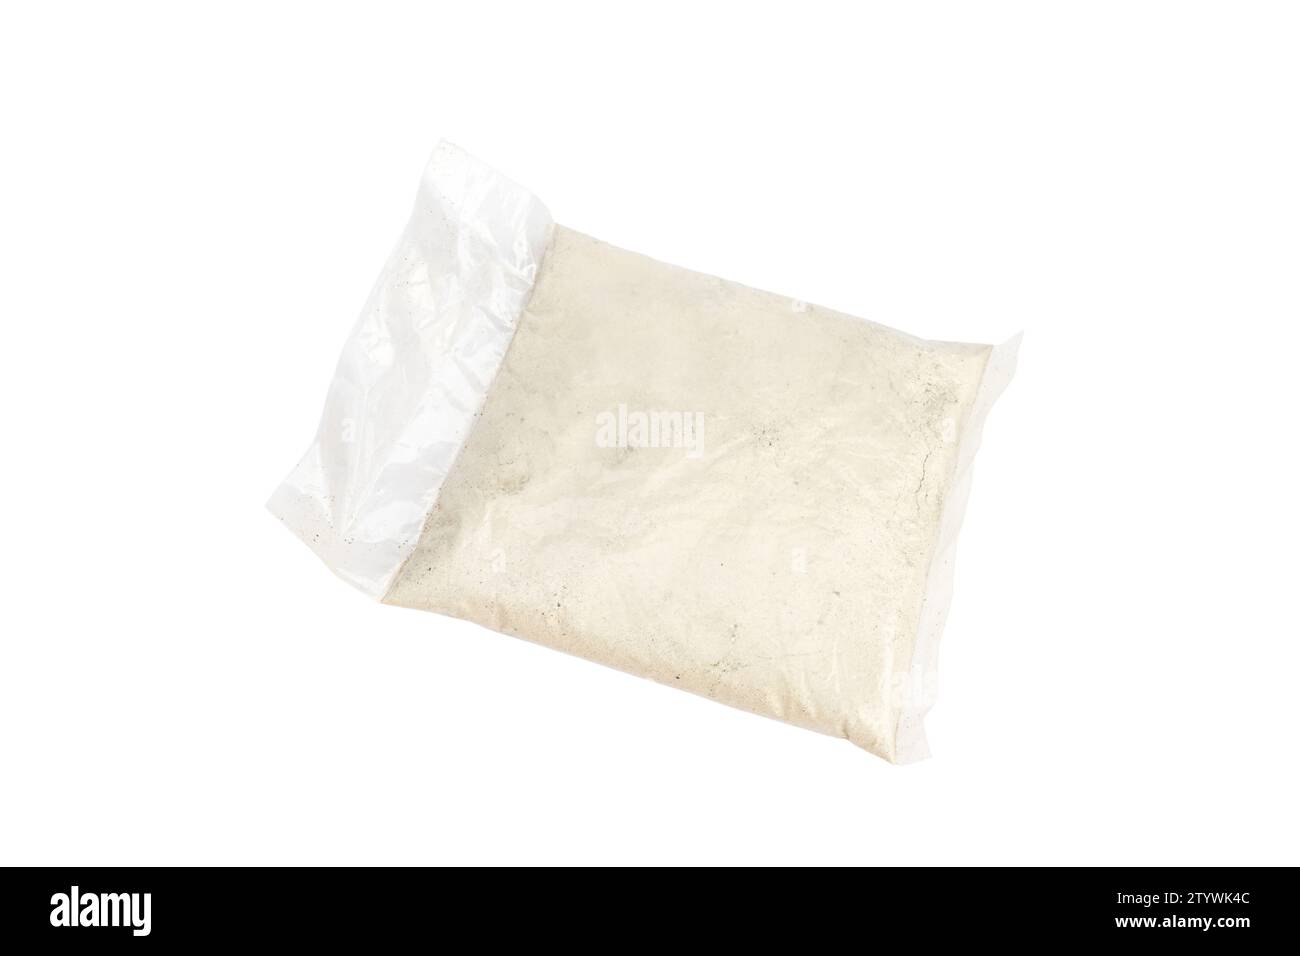 Bone Meal fertilizer covered in small plastic bag isolated on white background Stock Photo